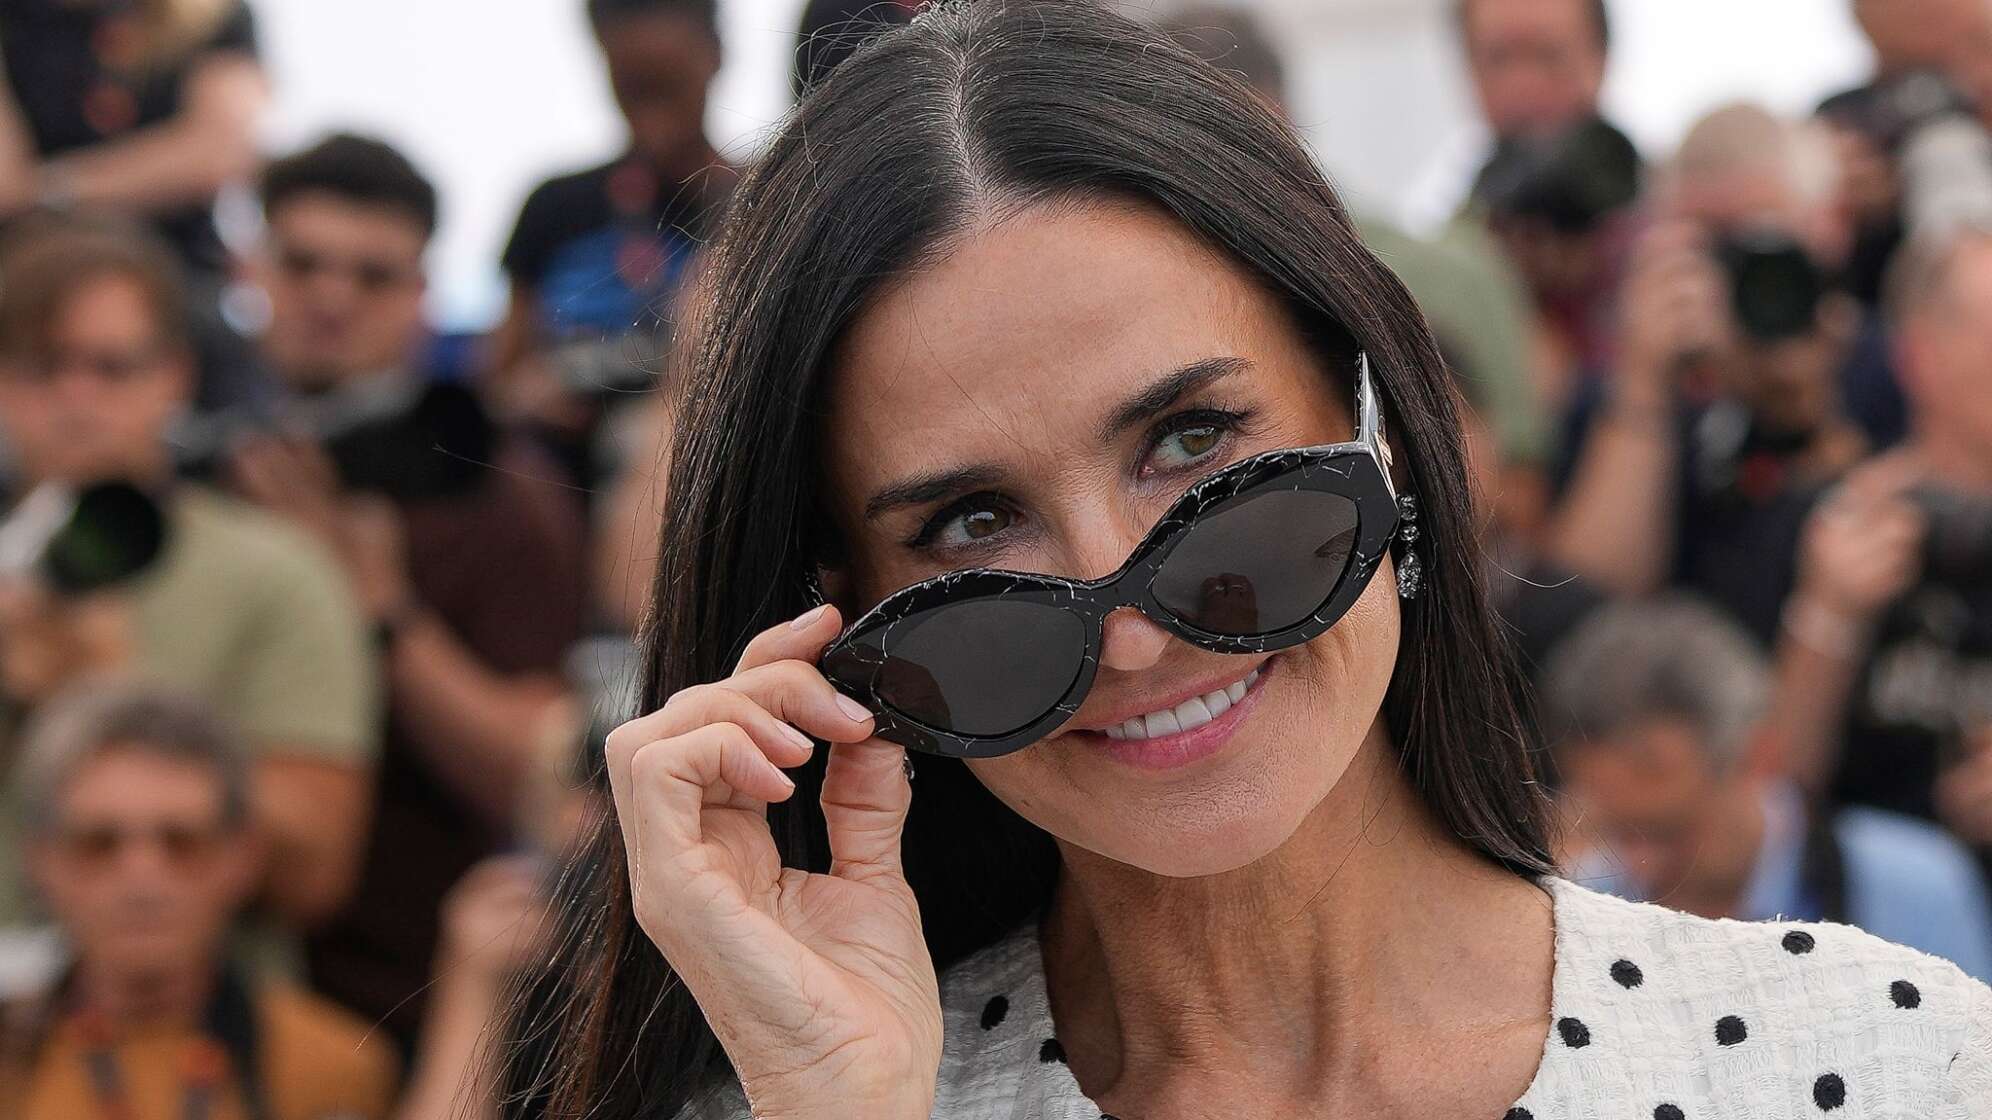 Filmfestival in Cannes - Demi Moore